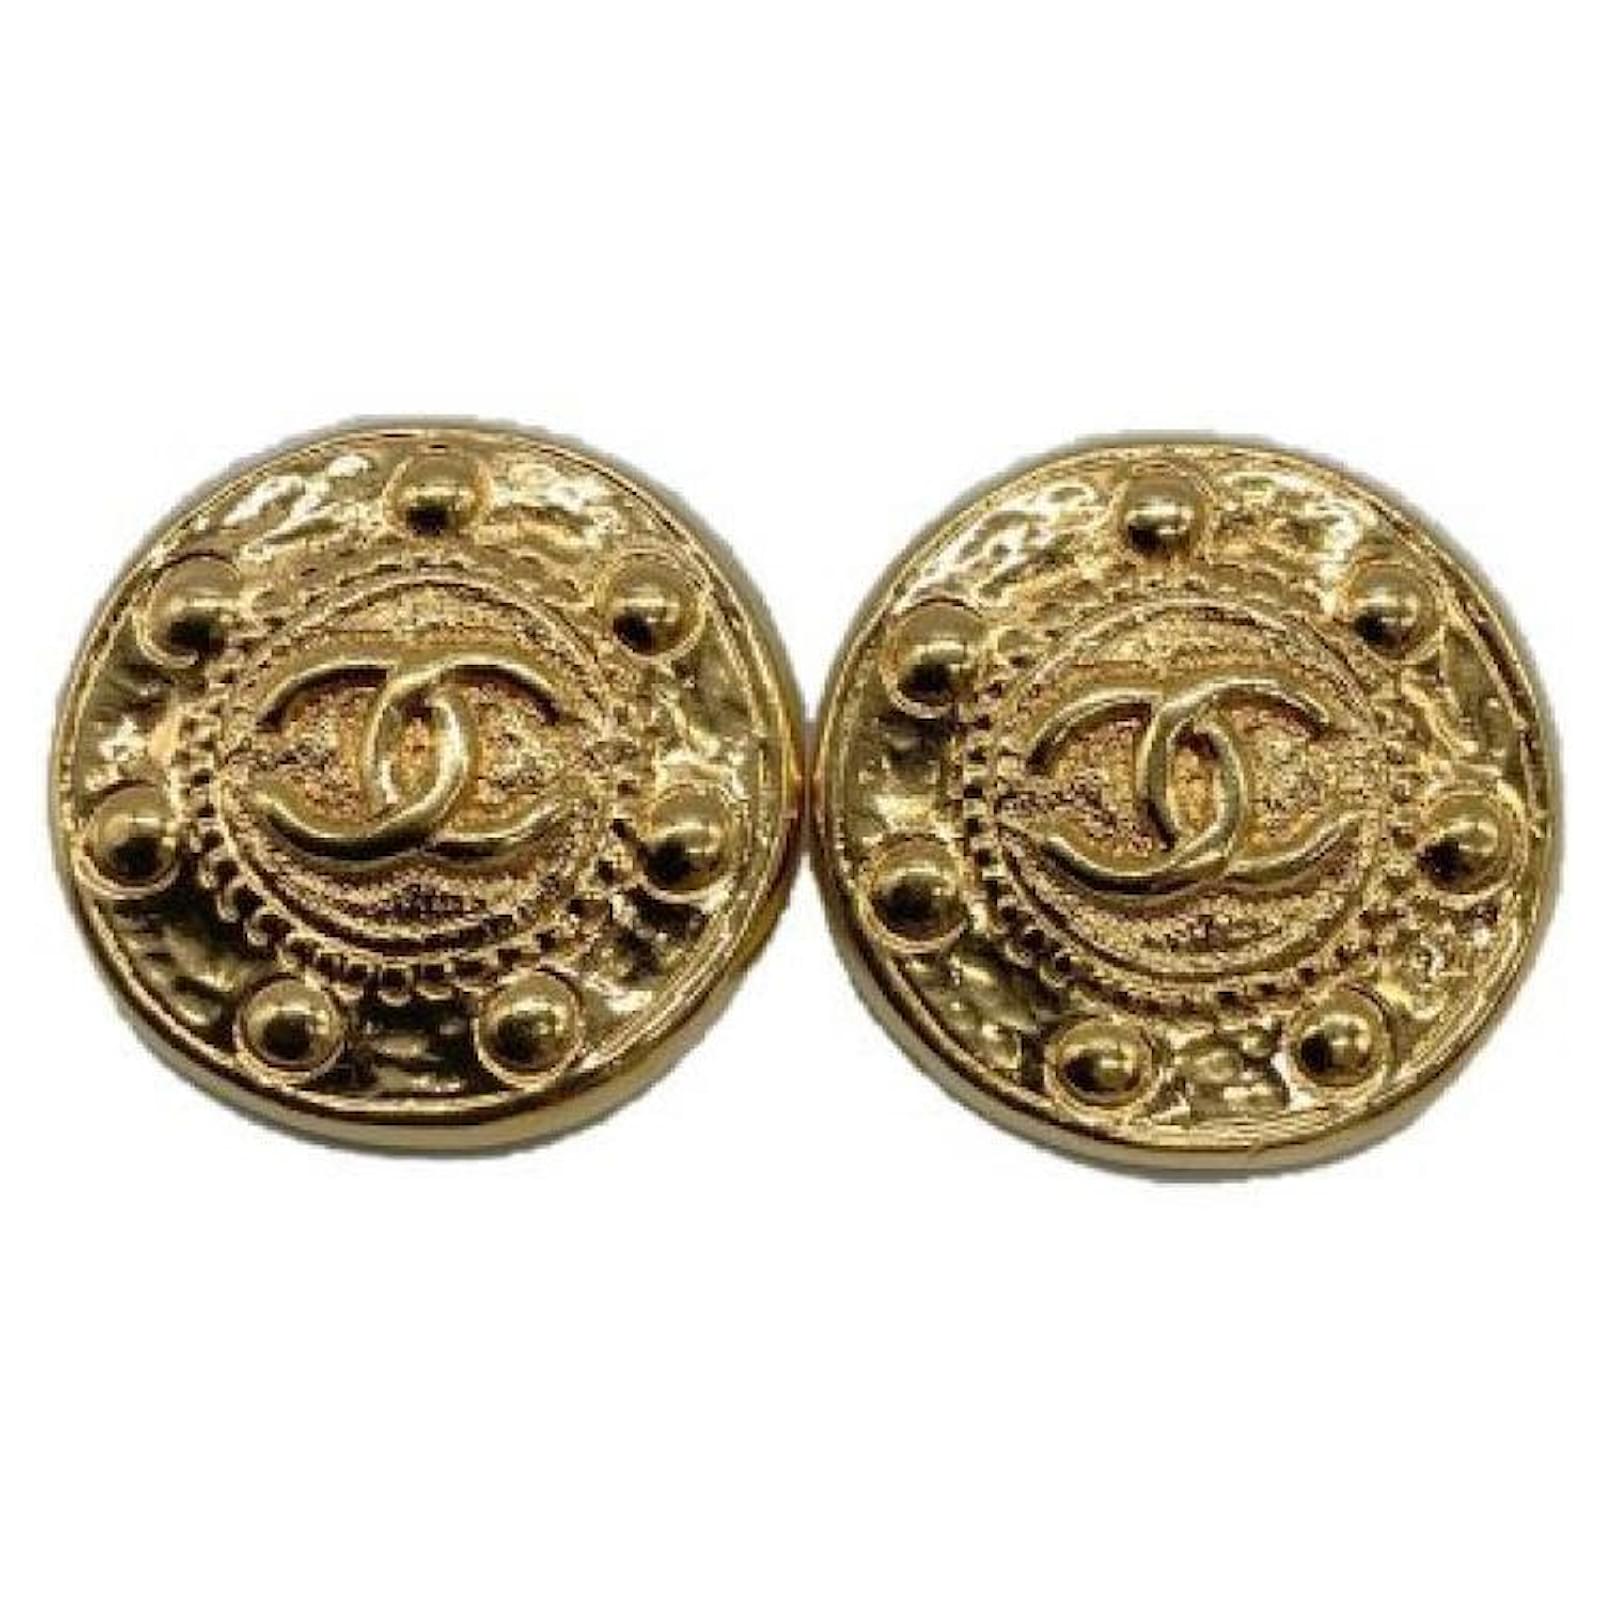 Chanel Goldtone Metal and Crystal CC No. 5 Round Earrings